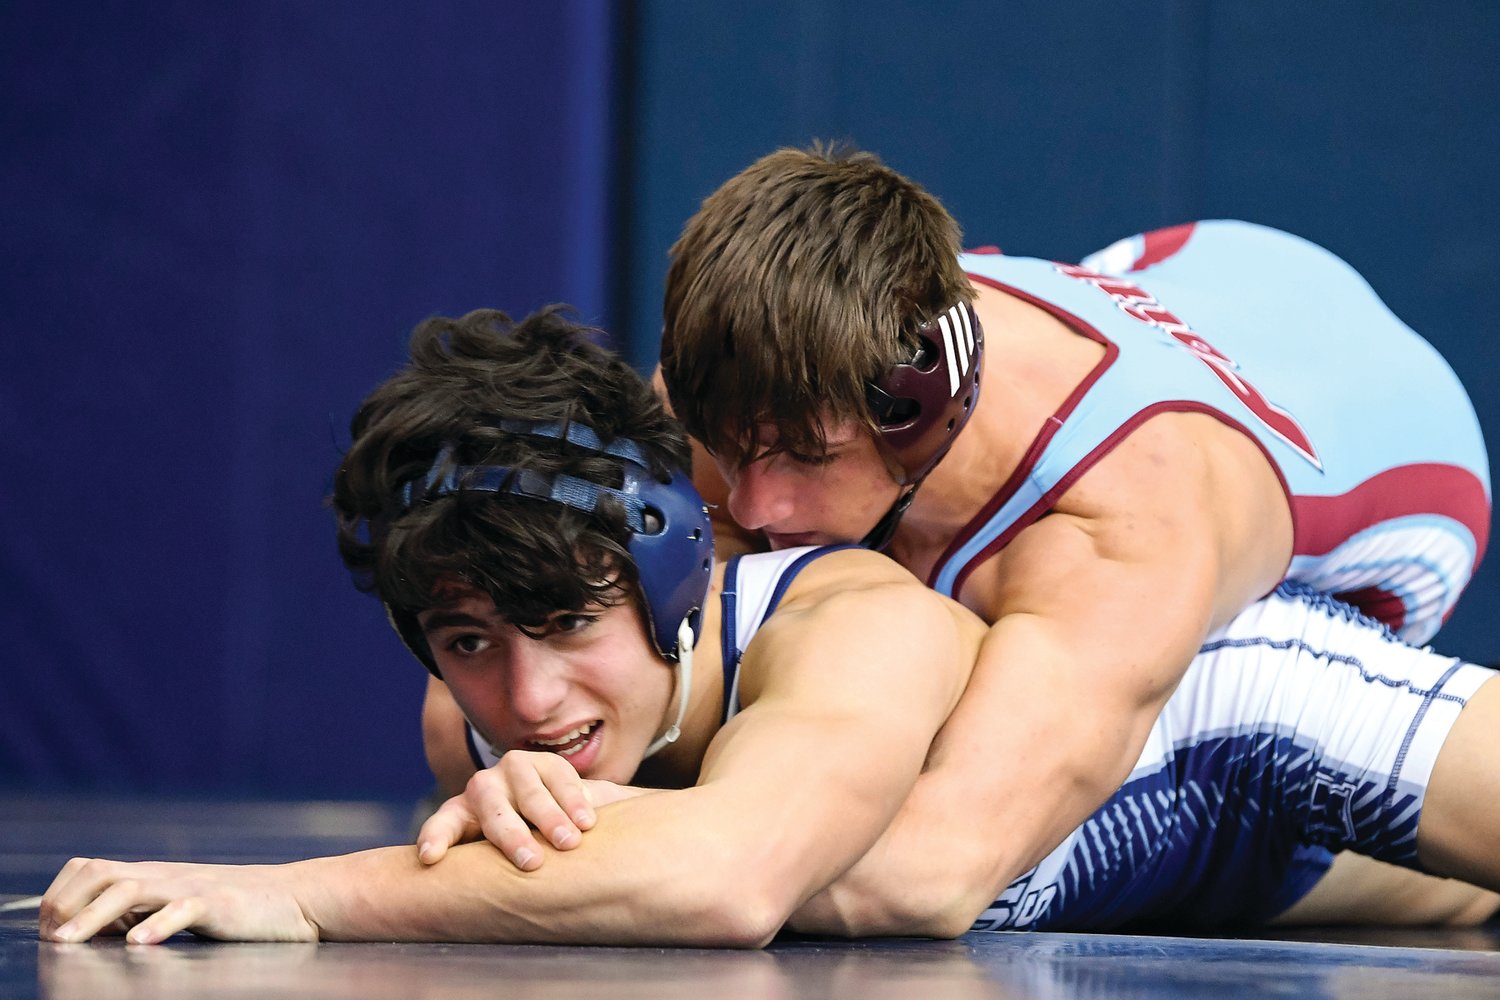 Faith Christian Academy’s Cody Wagner (on top) during his 160-pound match against Abington Heights’ Colin Price. Wagner would win this match by a 8-0 decision.